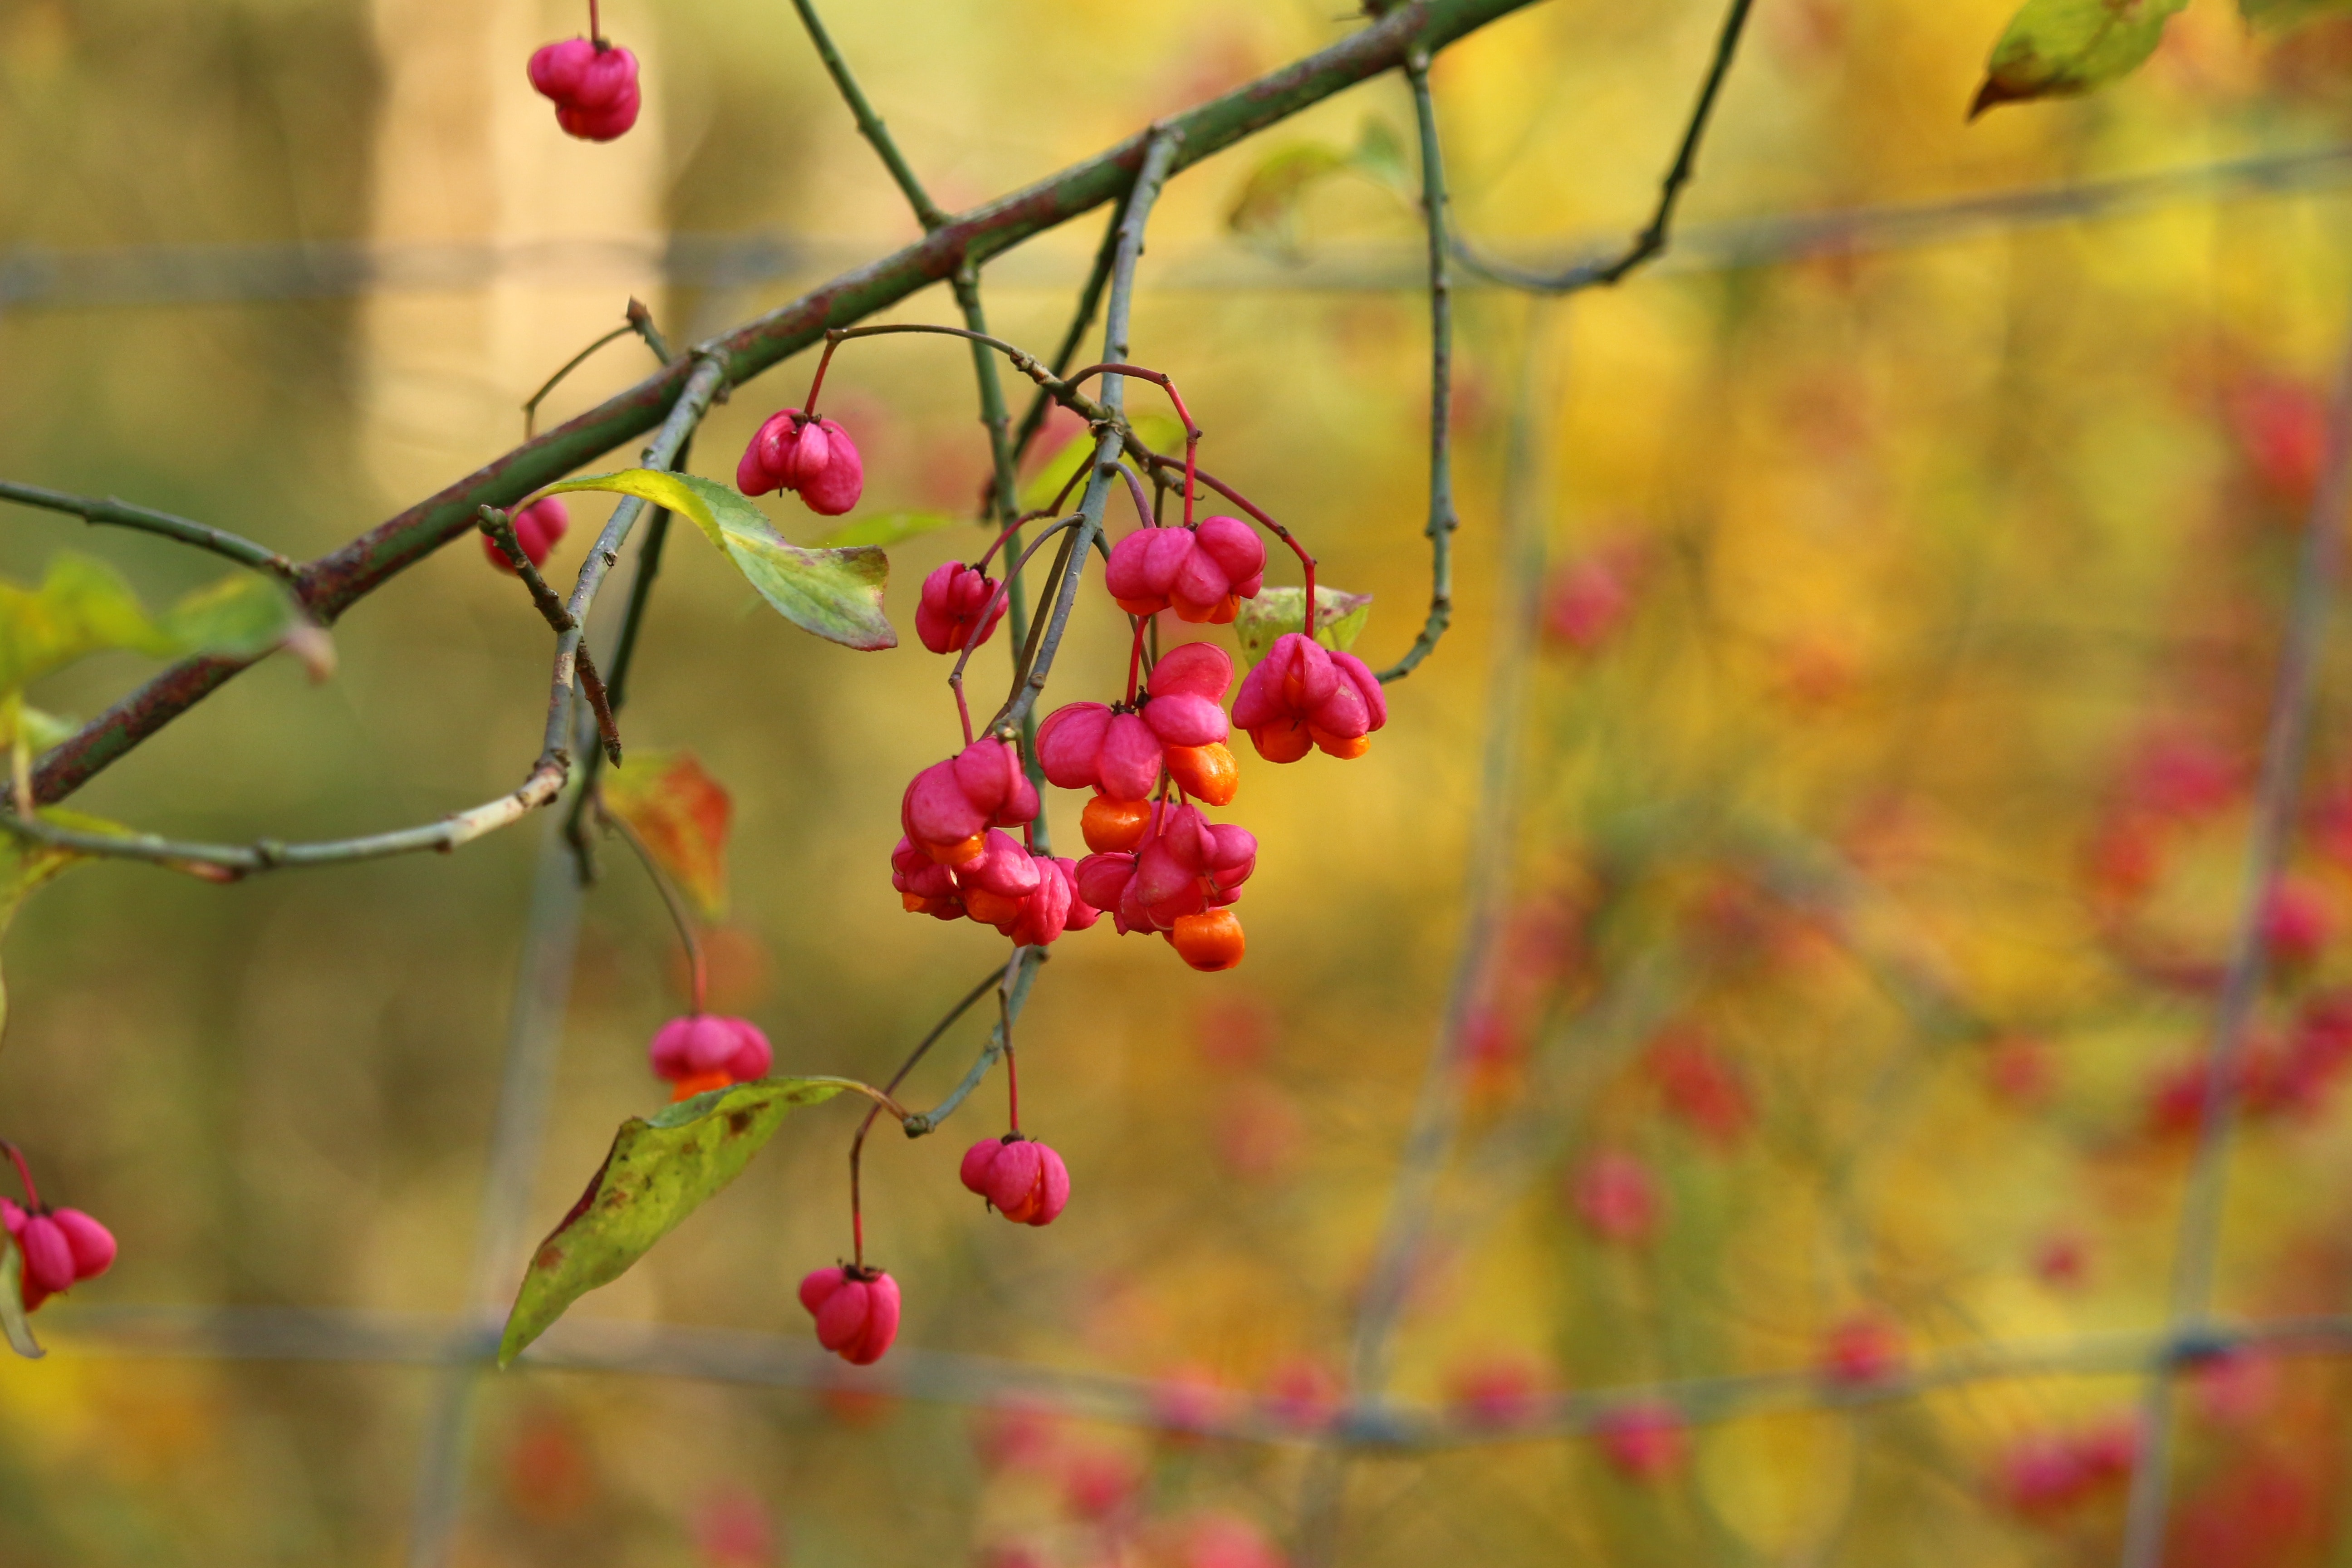 Bloom, Autumn, Blossom, Spindle, fruit, growth